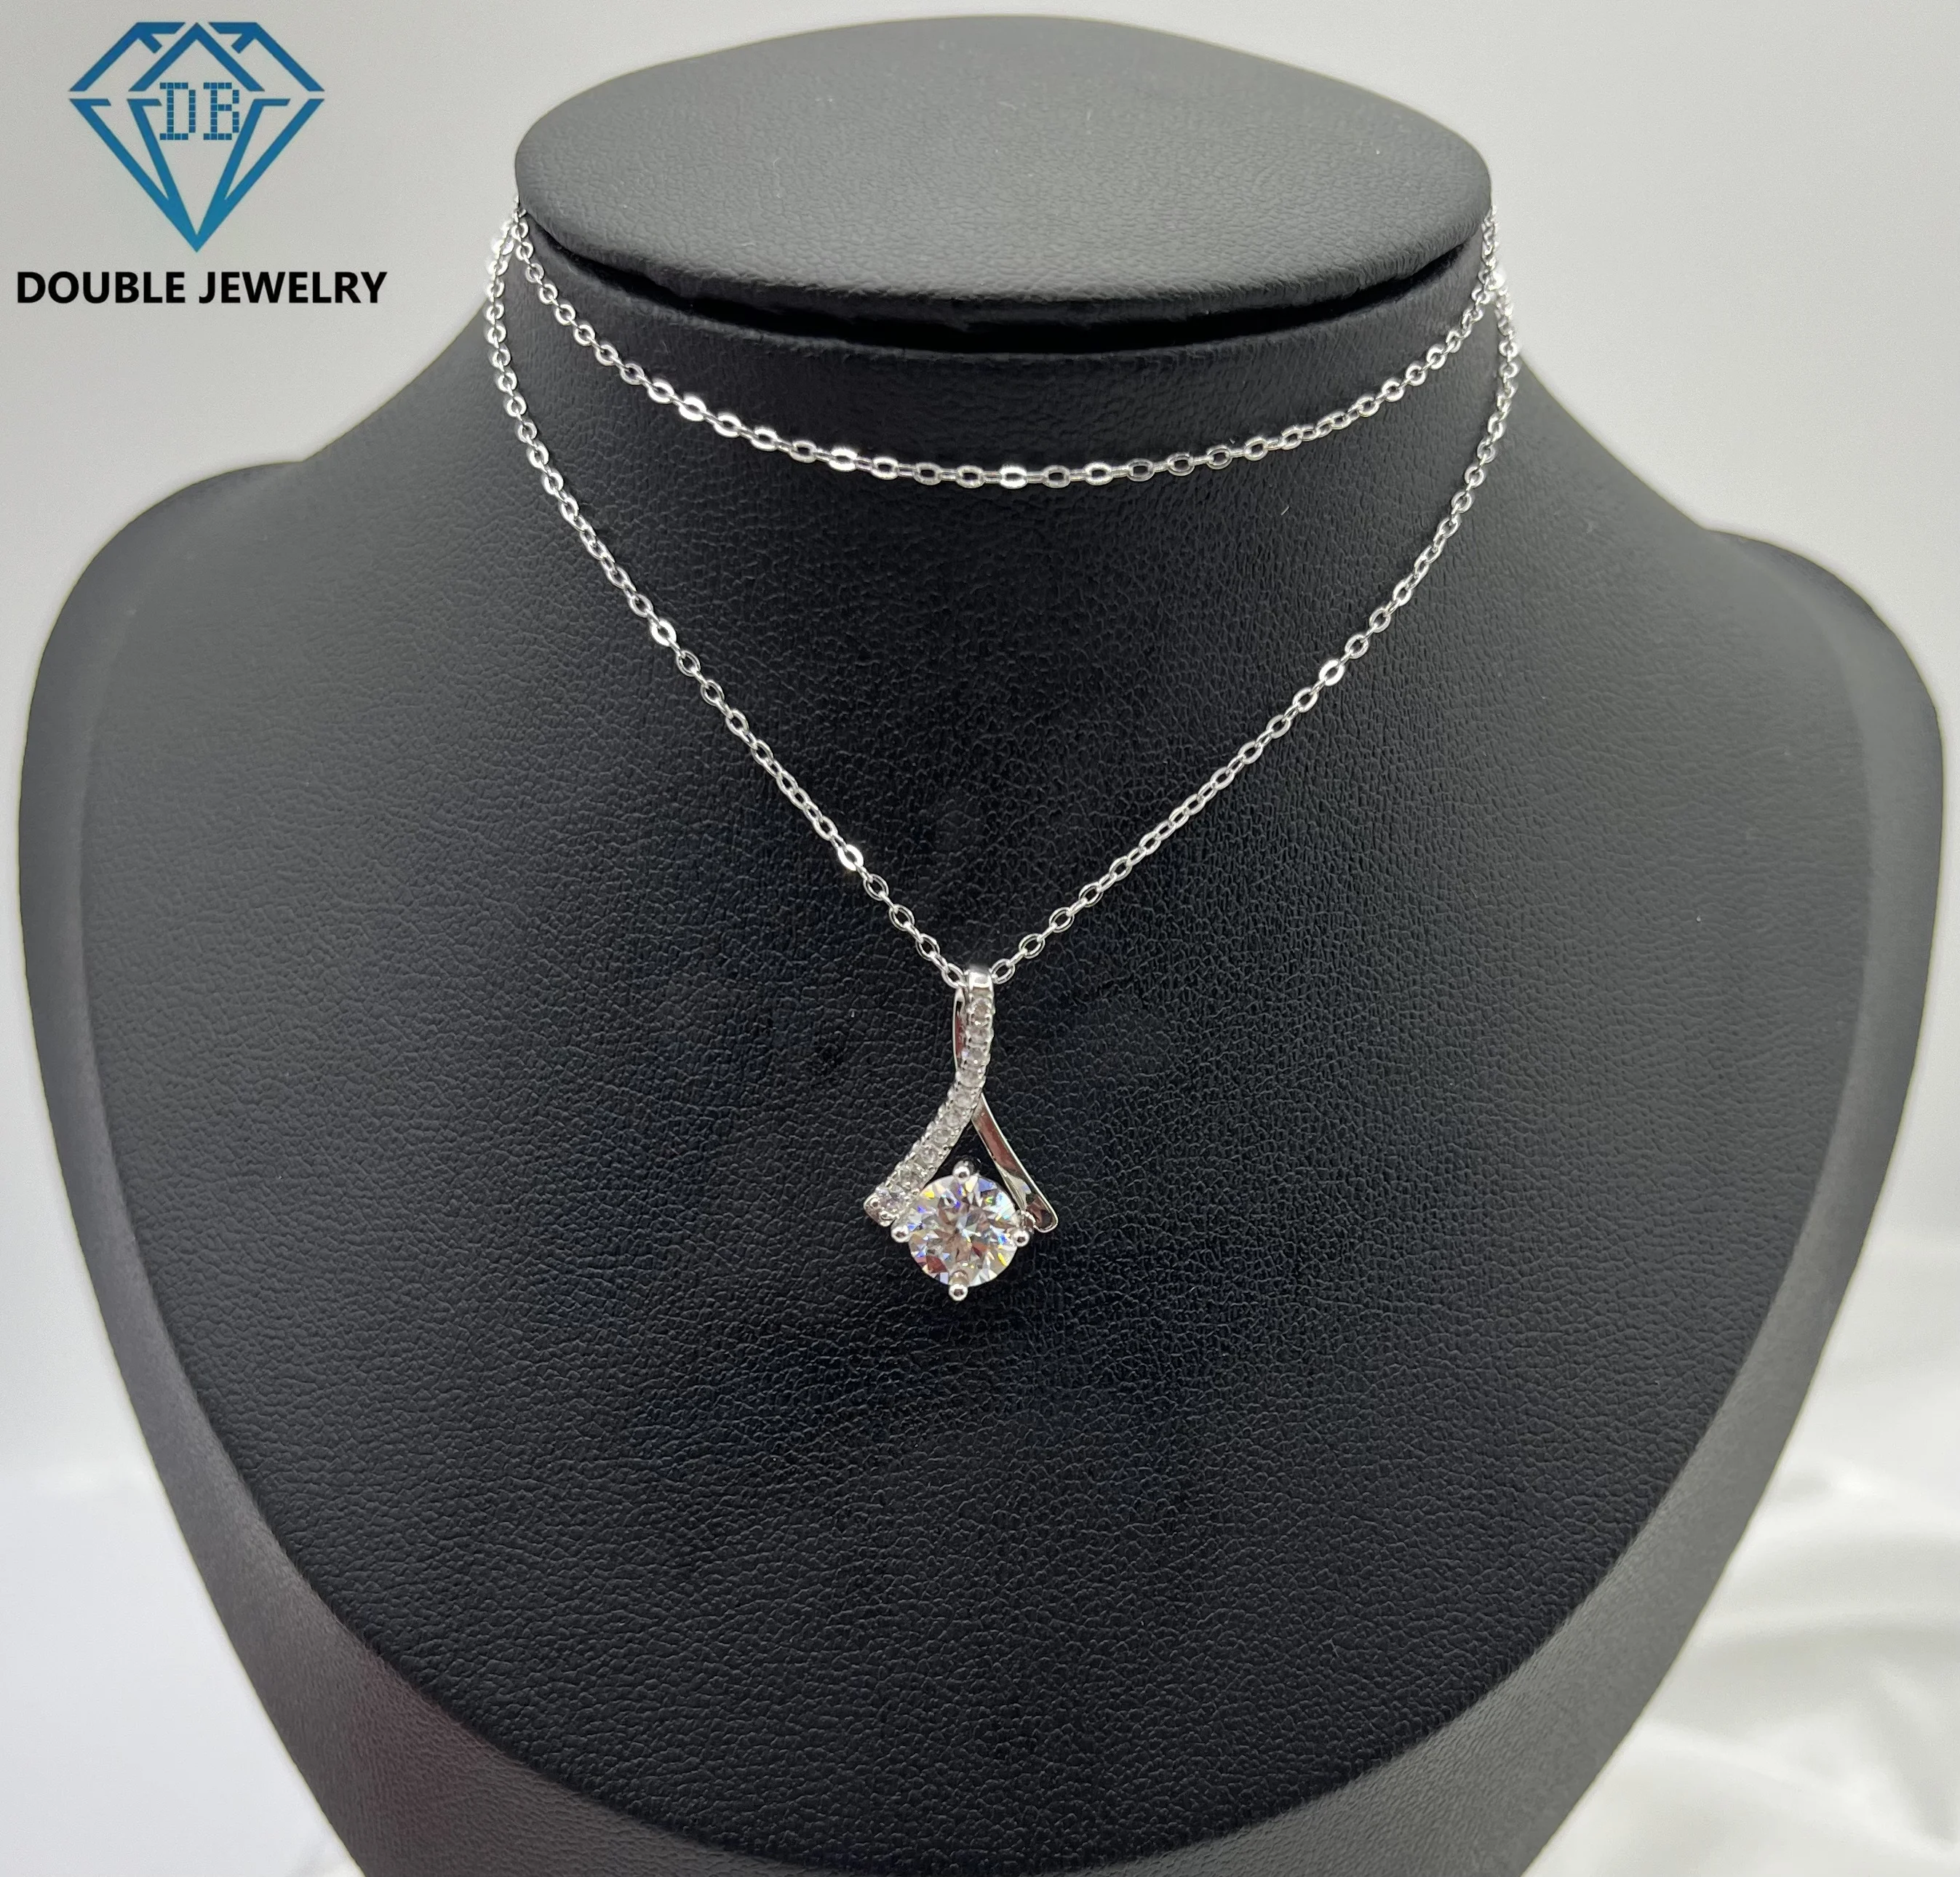 

Double Jewelry Bling Bling 1ct Moissanite diamond Pendant Necklace for friend jewelry gift 925 sterling silver pendants necklace